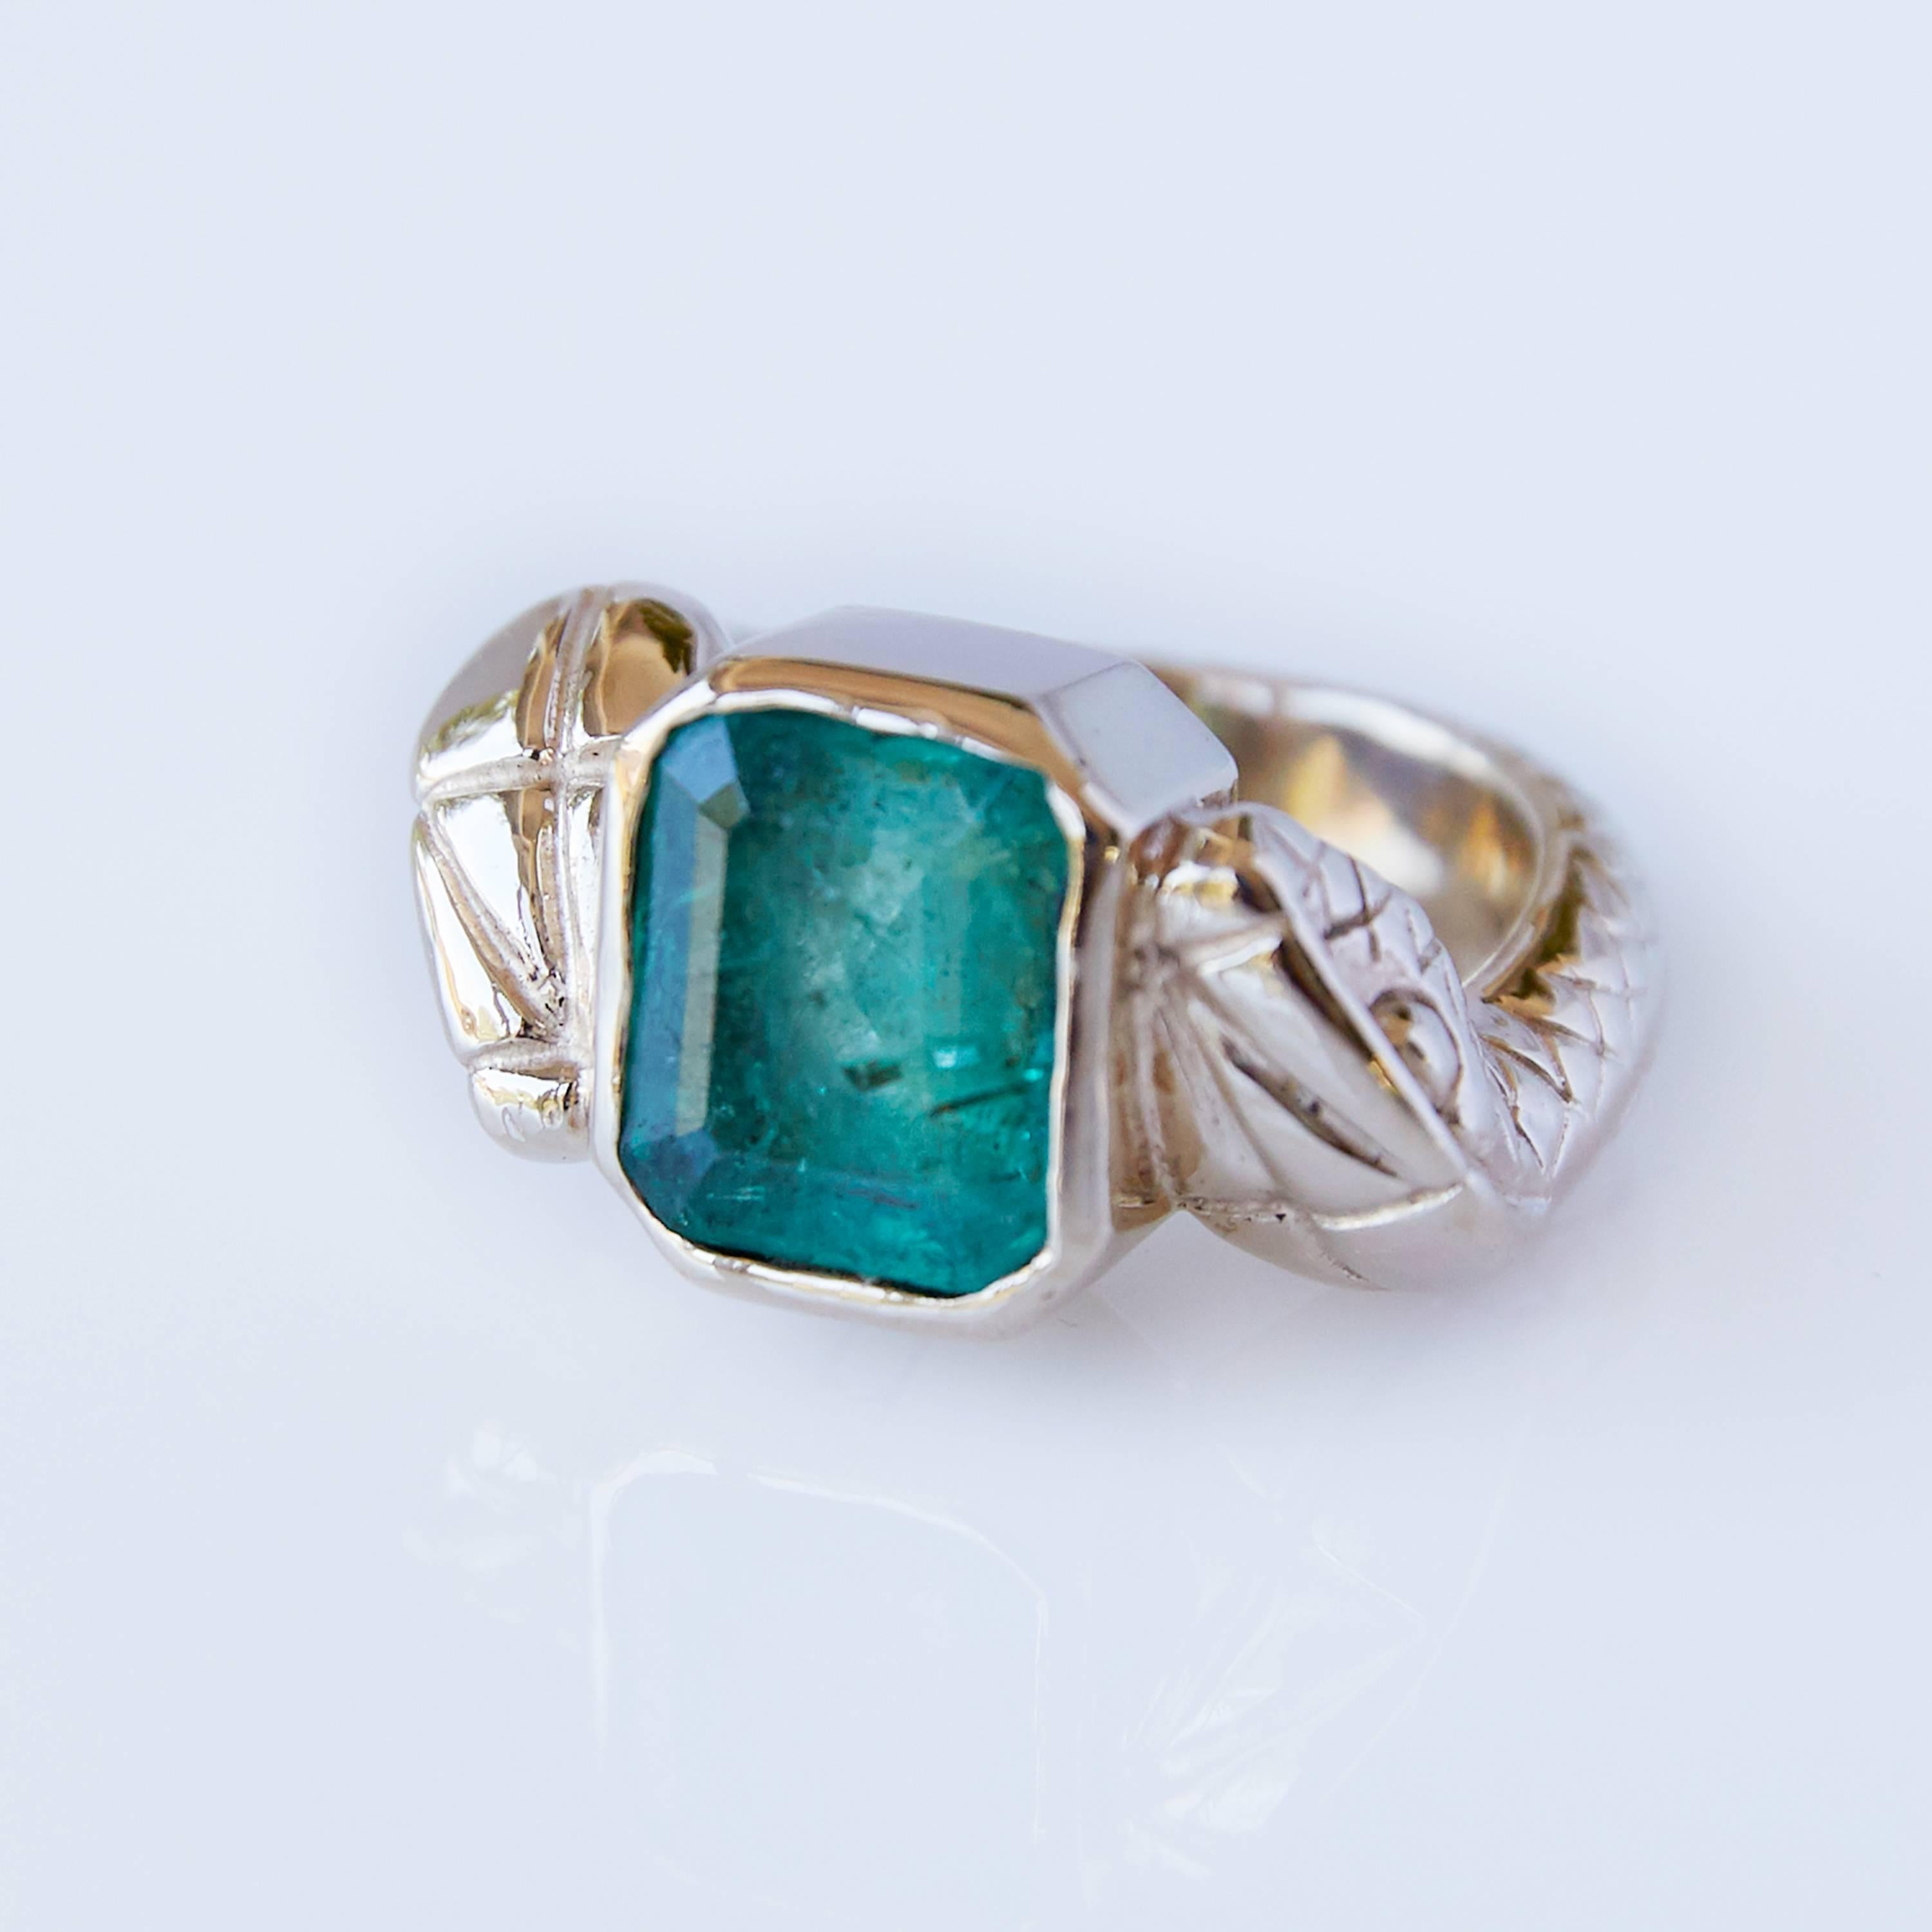 Baguette Cut Emerald Snake Ring Gold Fashion Cocktail Ring Animal Jewelry J Dauphin For Sale